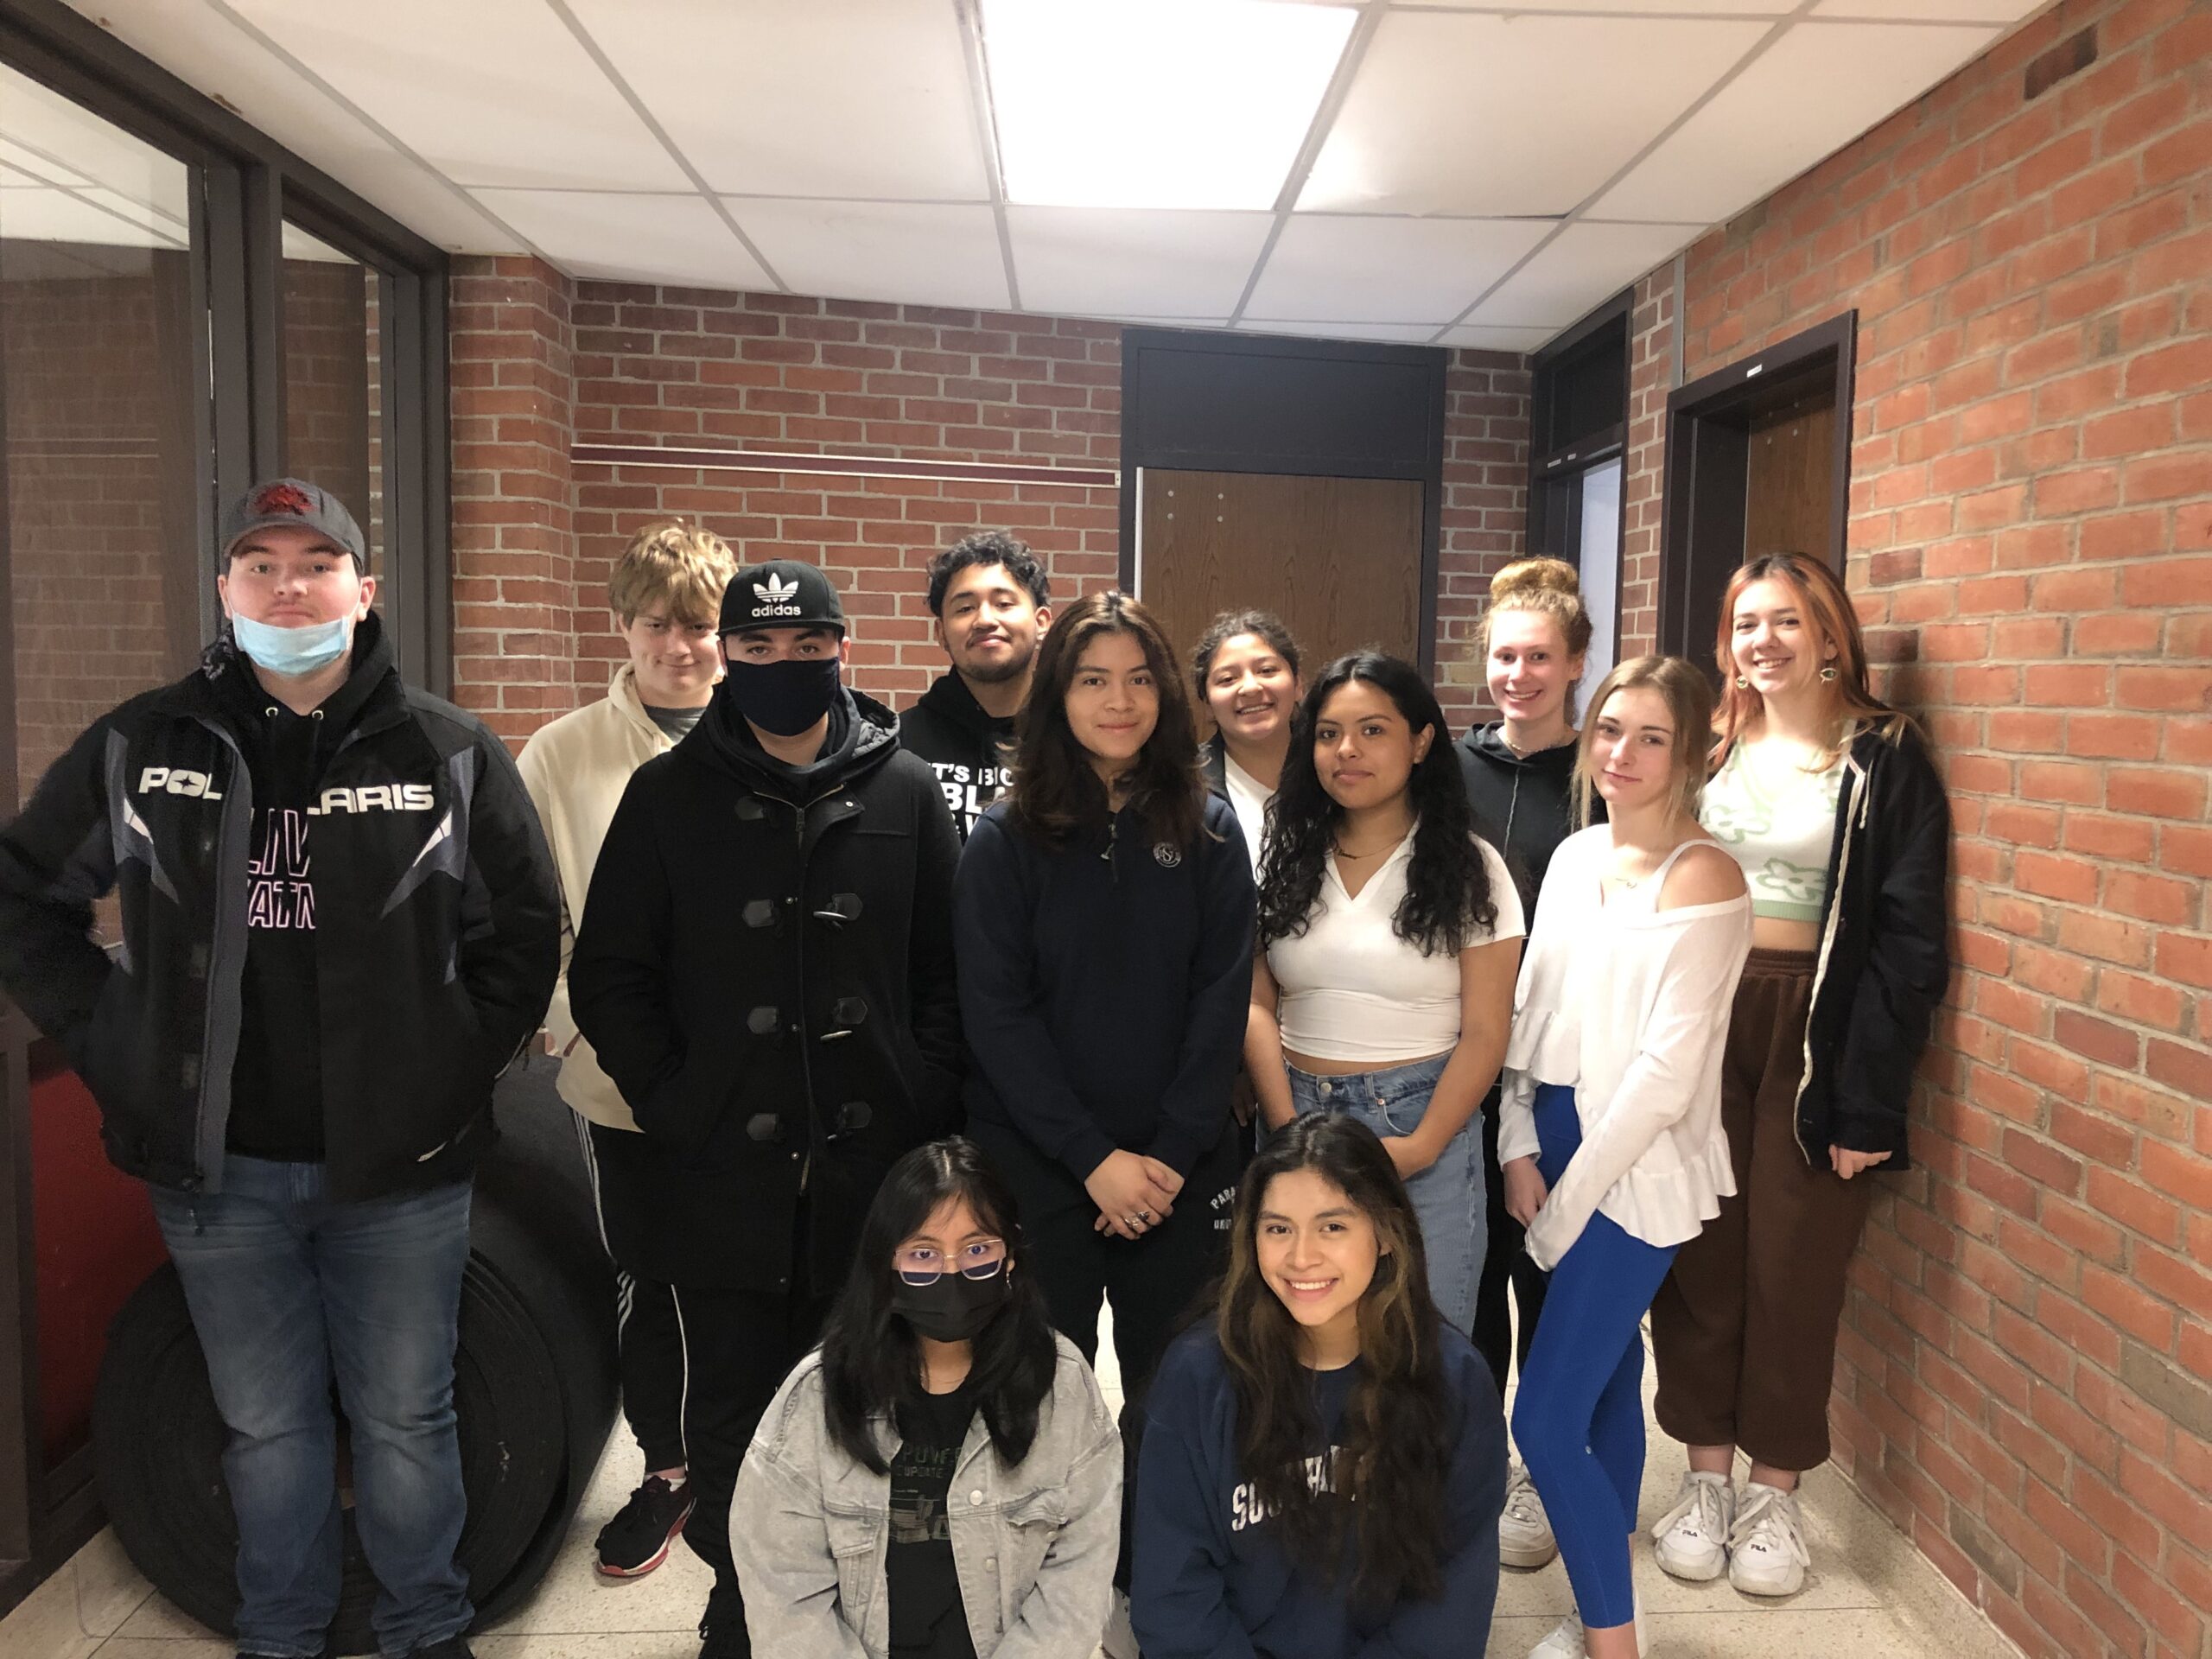 Southampton High School students in teacher Saundra Dubin’s Holocaust courses will mark Yom HaShoah, or Holocaust Remembrance Day, by presenting to the congregation of Temple Adas Israel in Sag Harbor on April 29. COURTESY SOUTHAMPTON SCHOOL DISTRICT